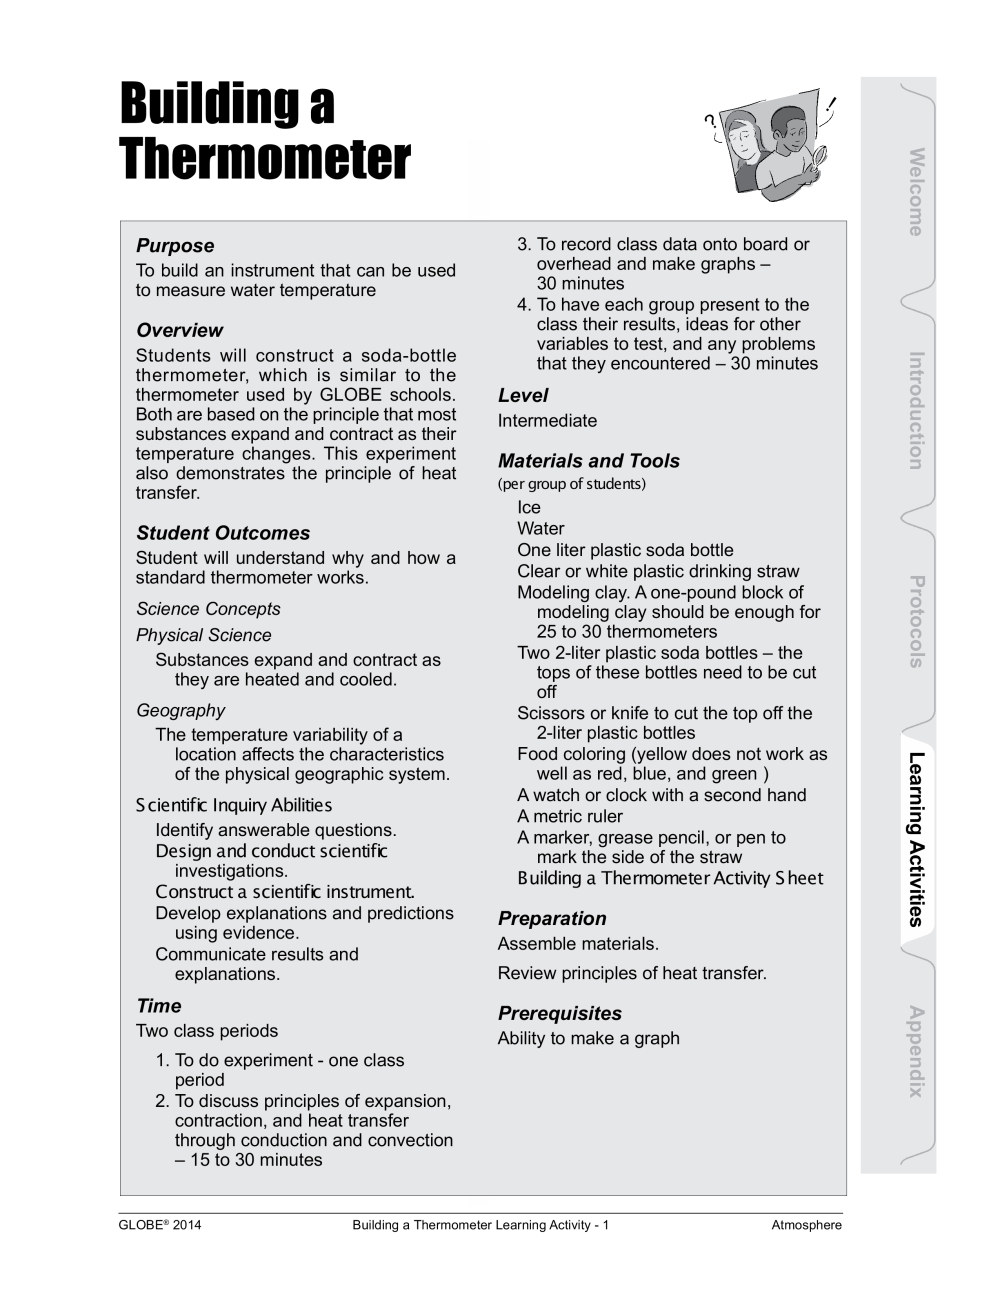 Learning Activities preview for Building a Thermometer